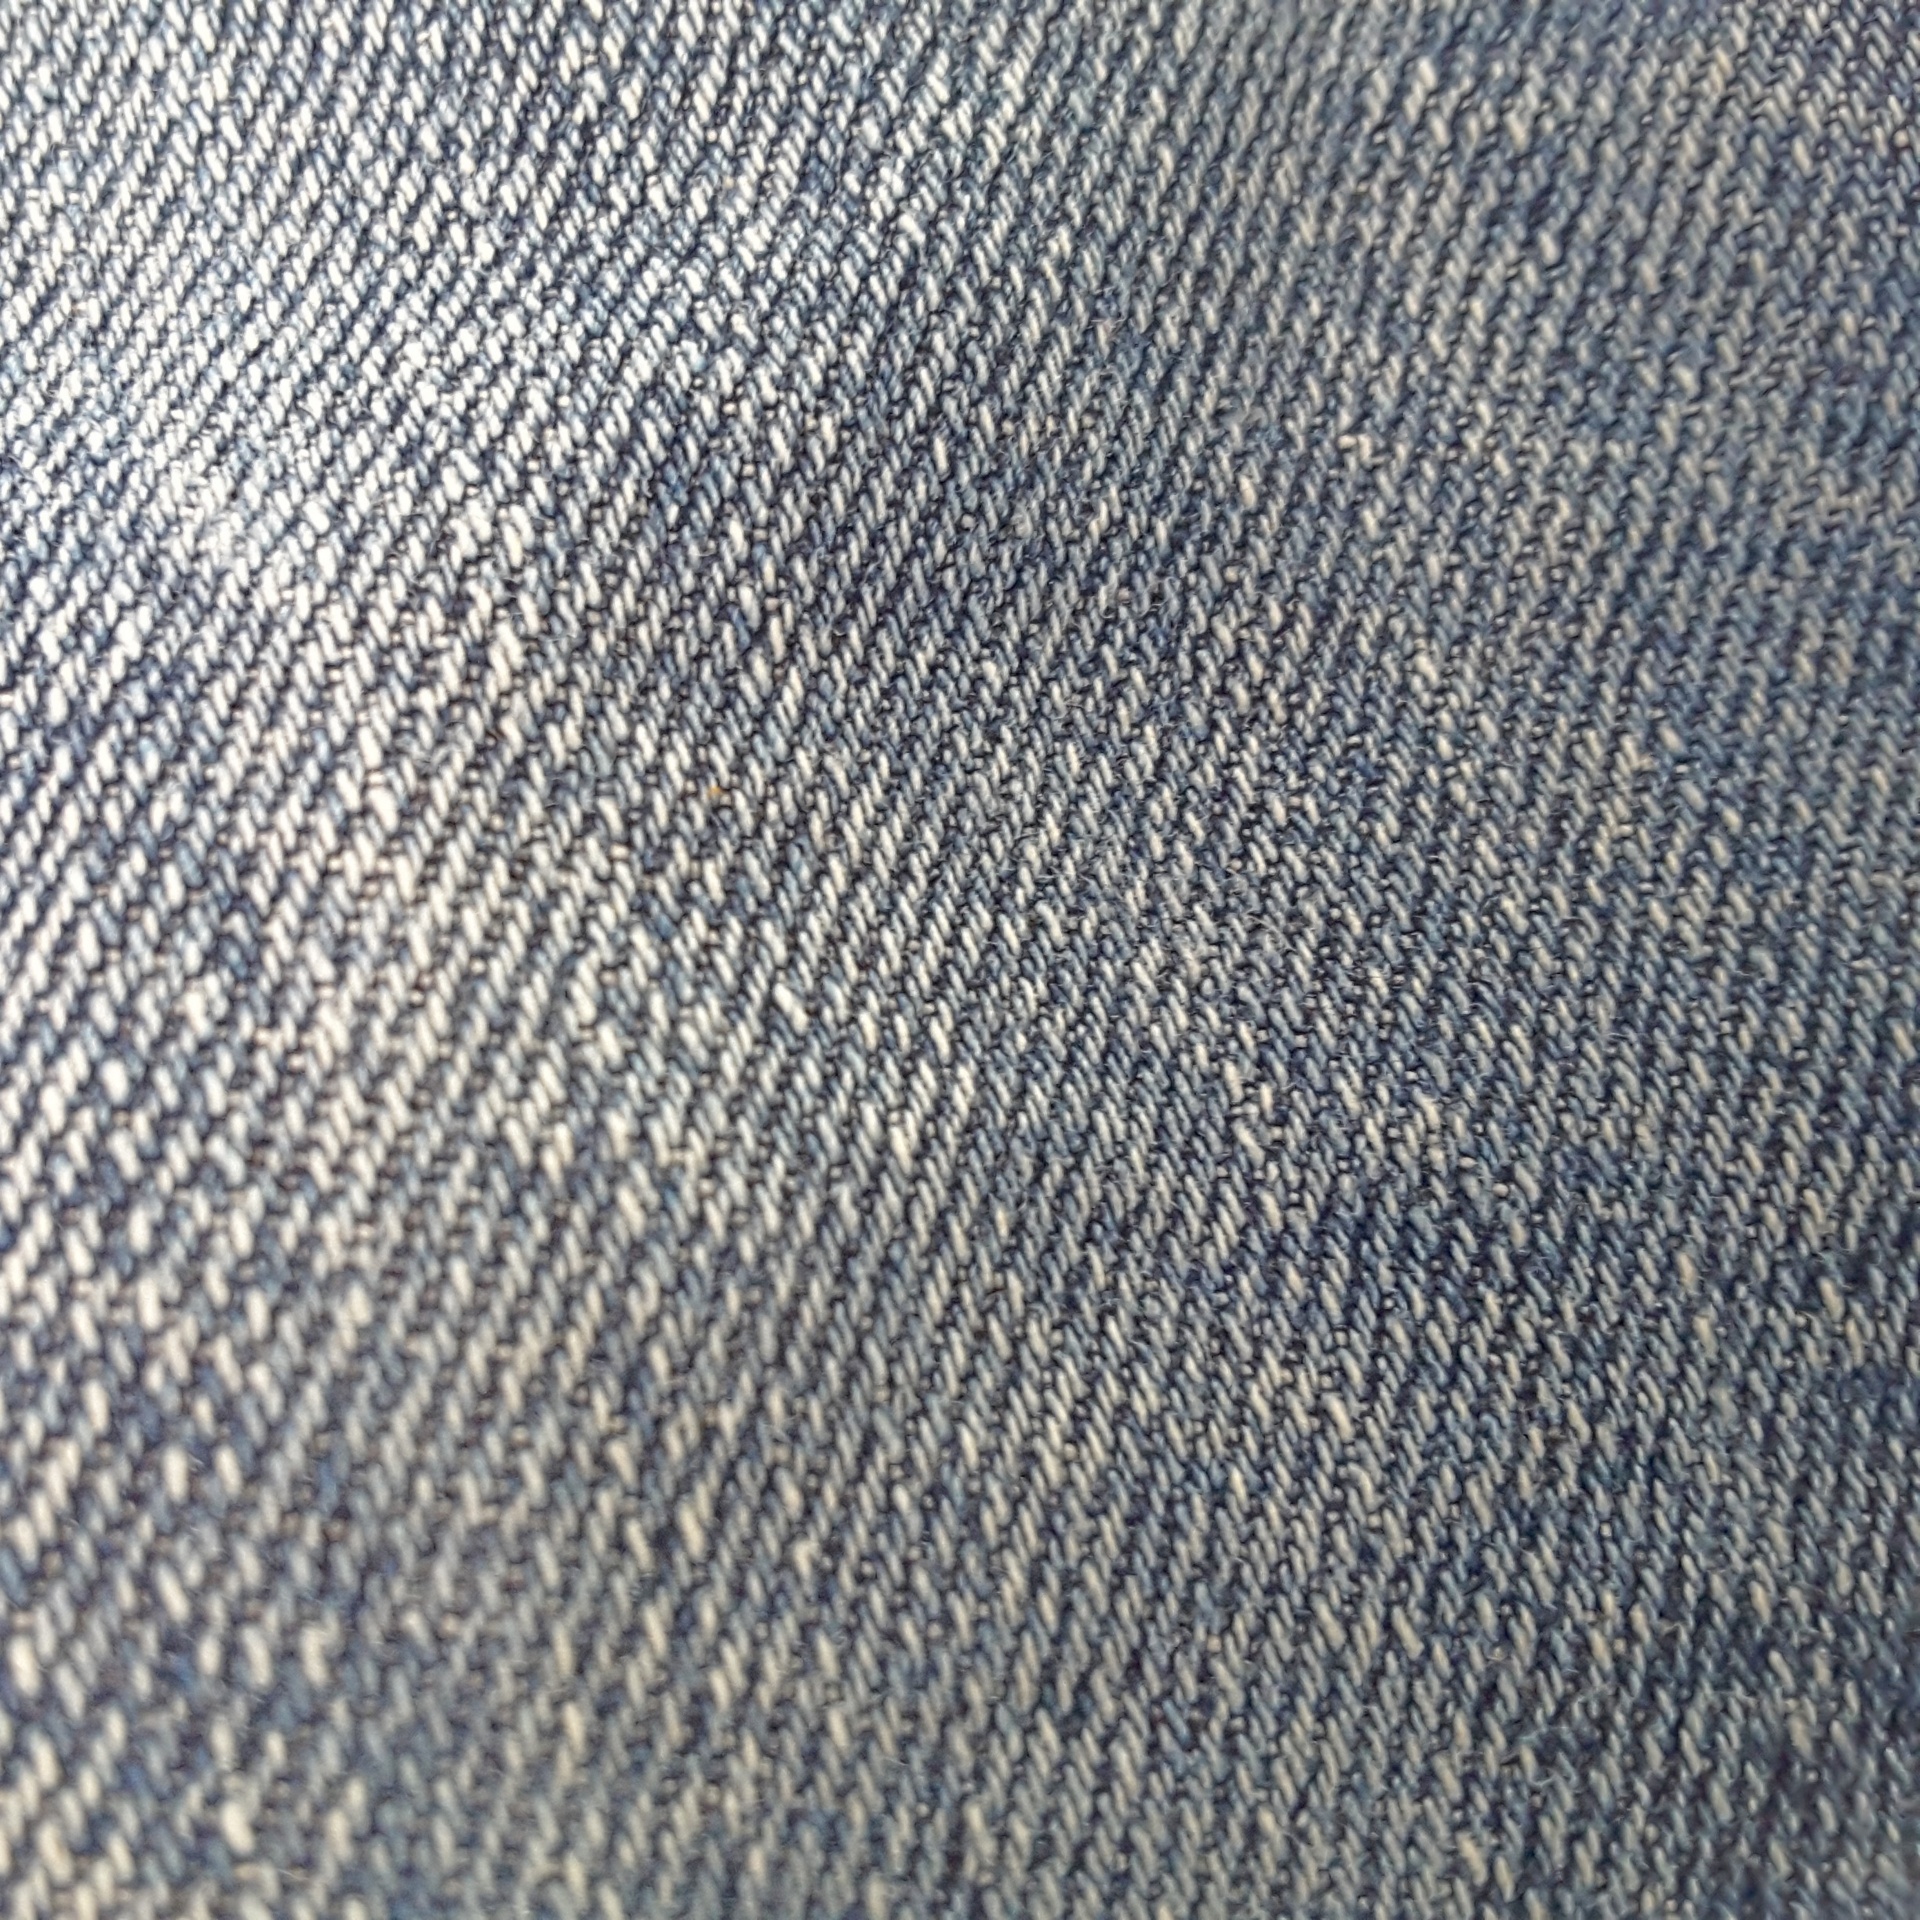 Blue Fabric 1 Free Stock Photo - Public Domain Pictures